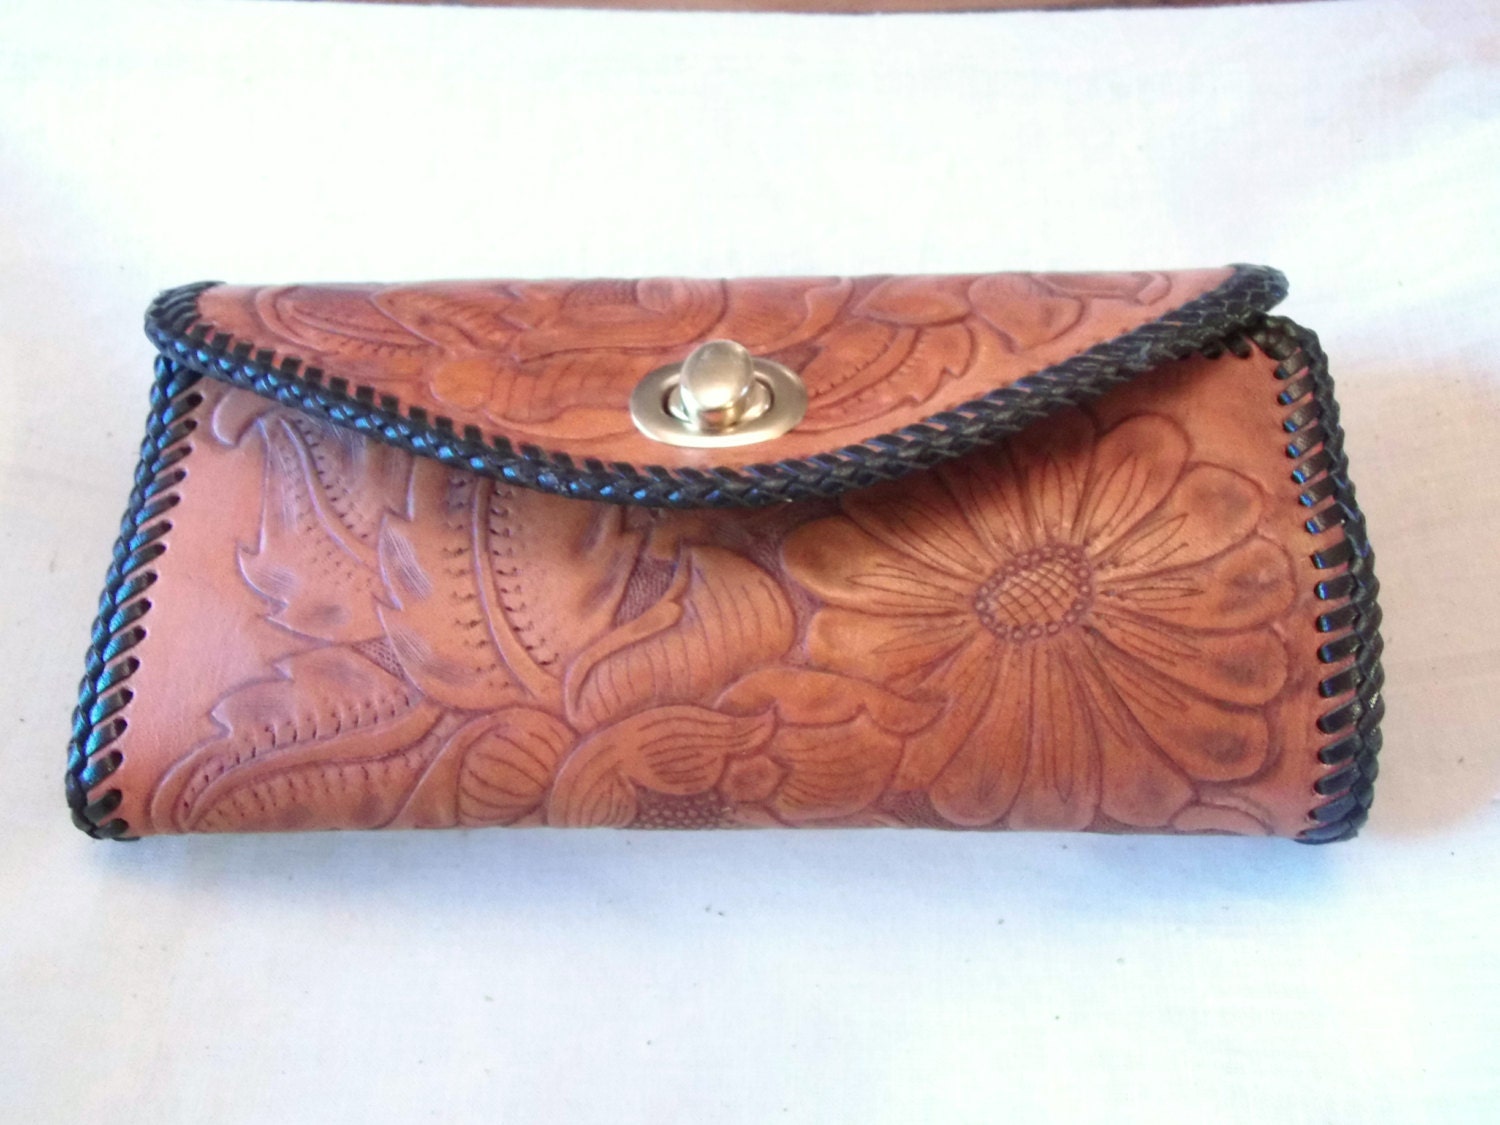 Hand tooled leather clutch purse in a flower design Made in